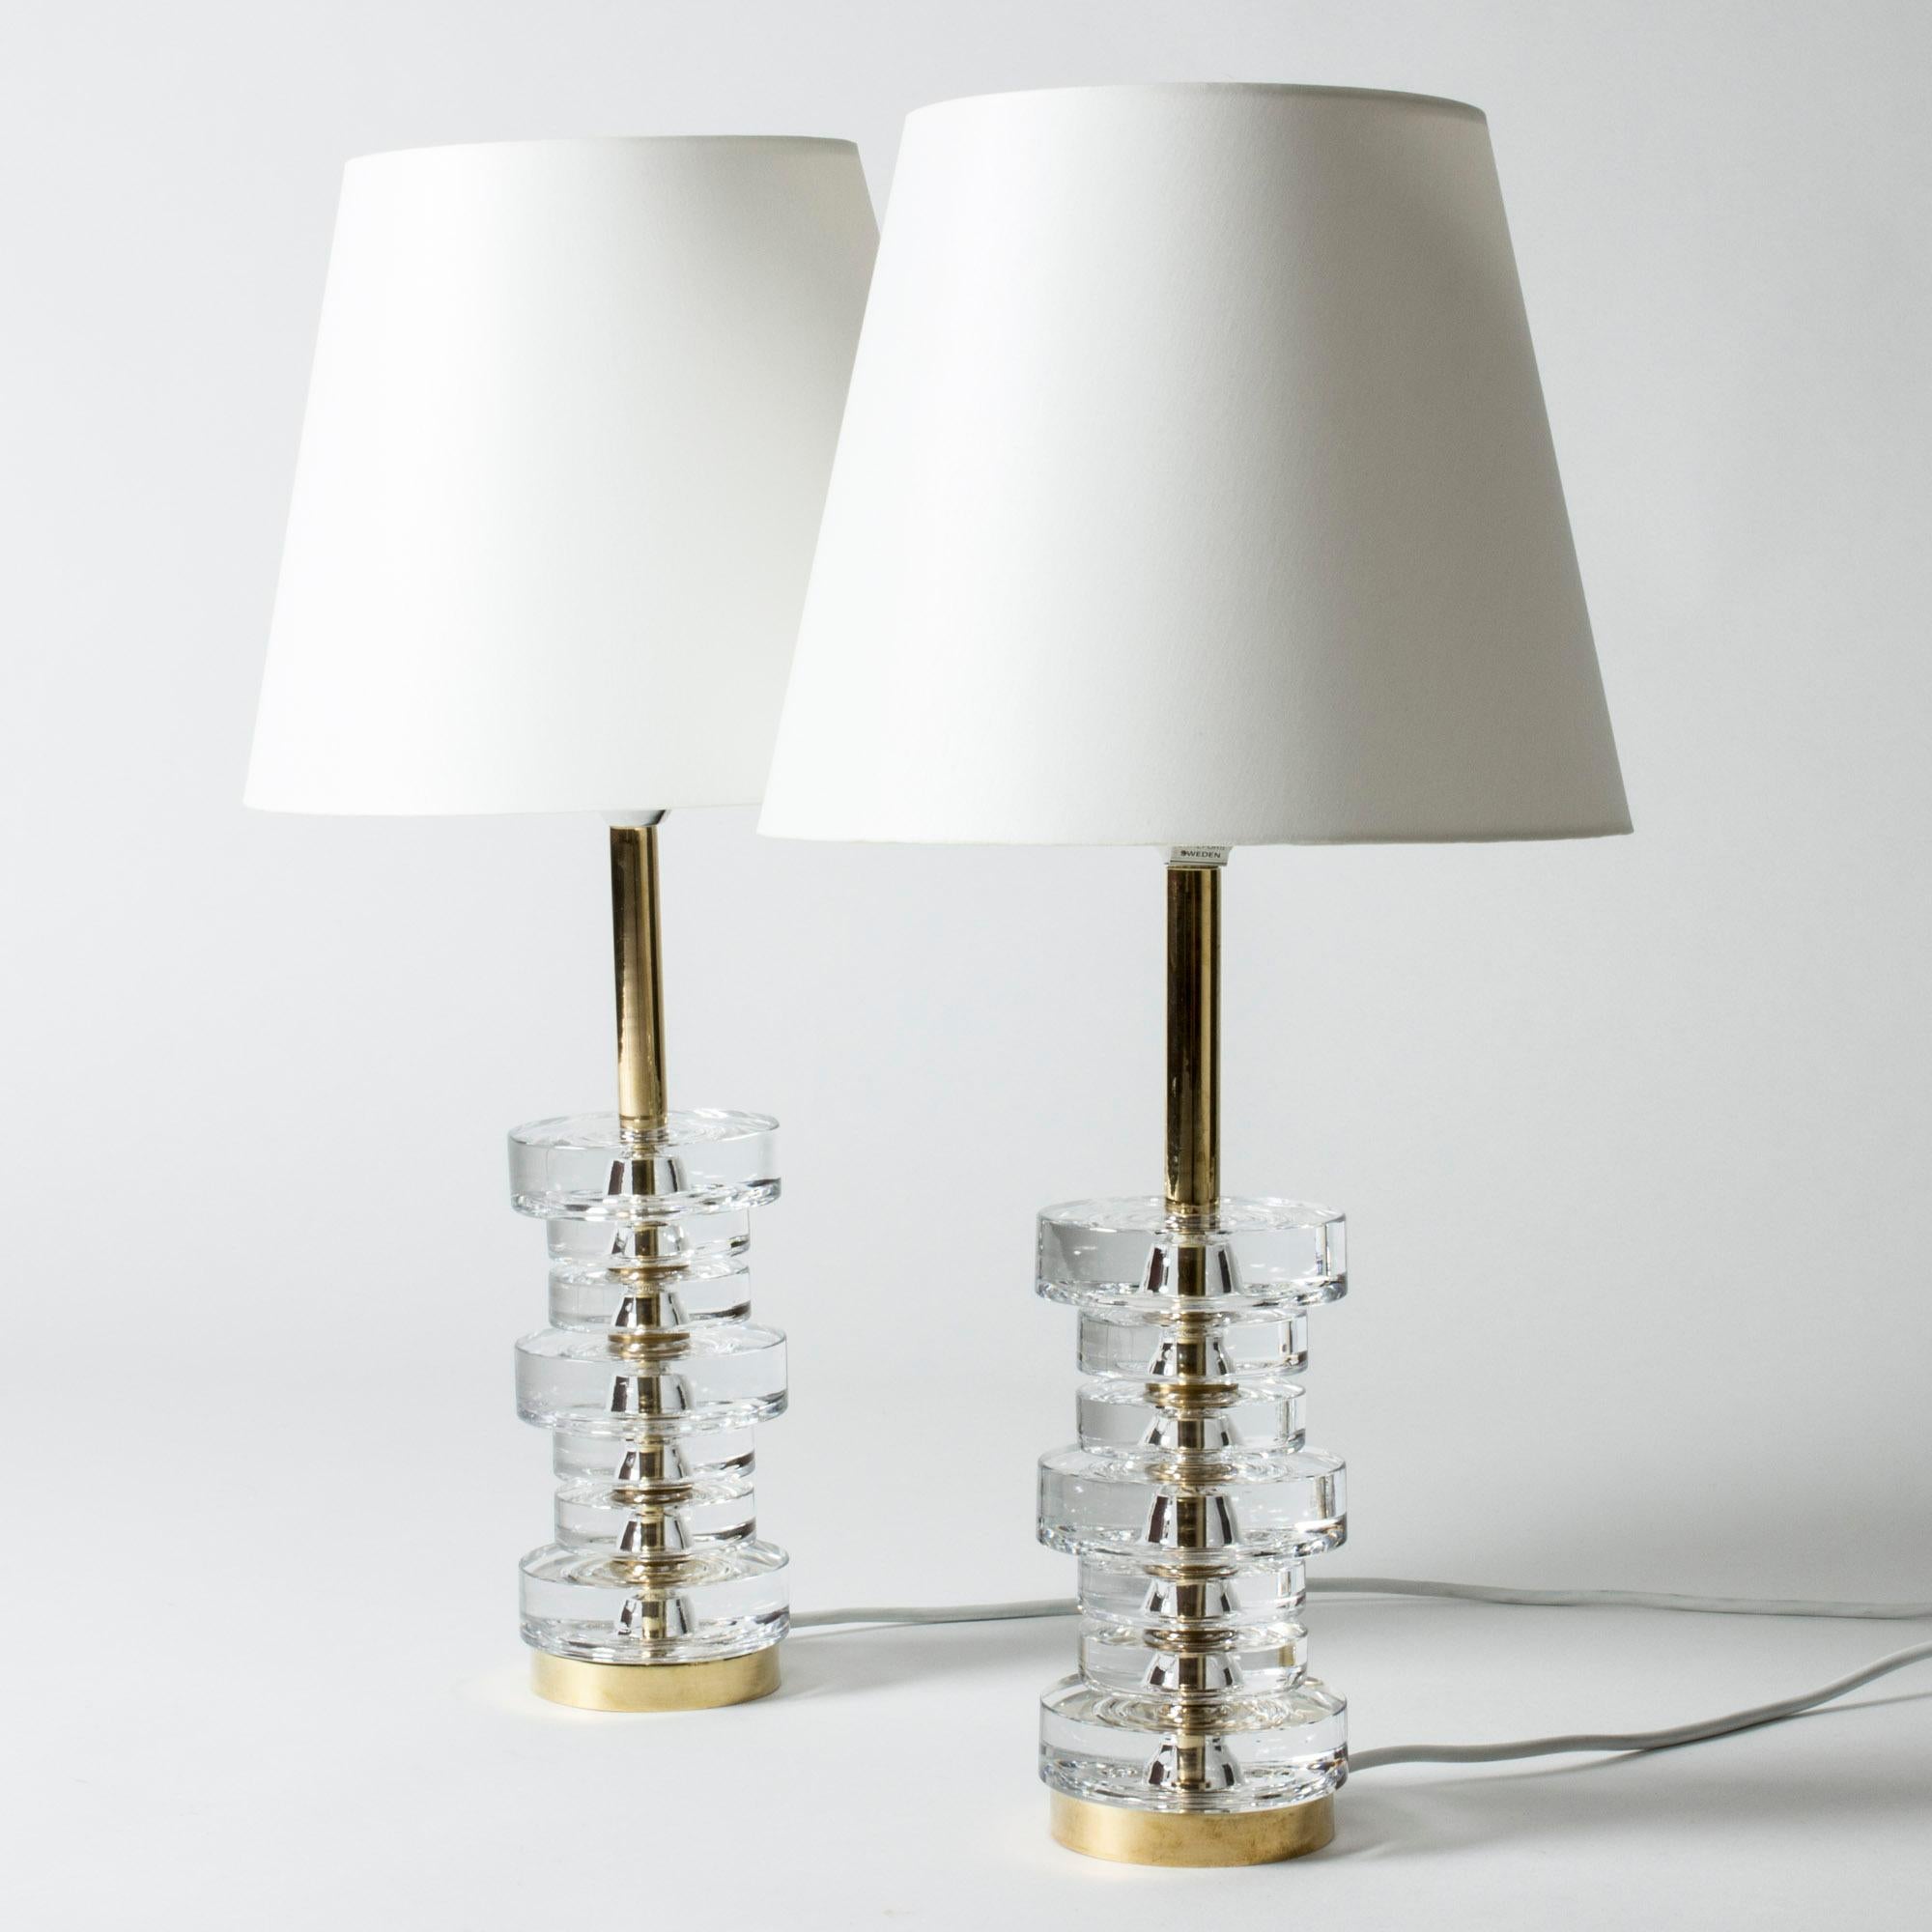 Pair of elegant table lamps by Carl Fagerlund, made in crystal glass and brass. Bases made from thick, clear stacked crystal discs around a brass center bar.